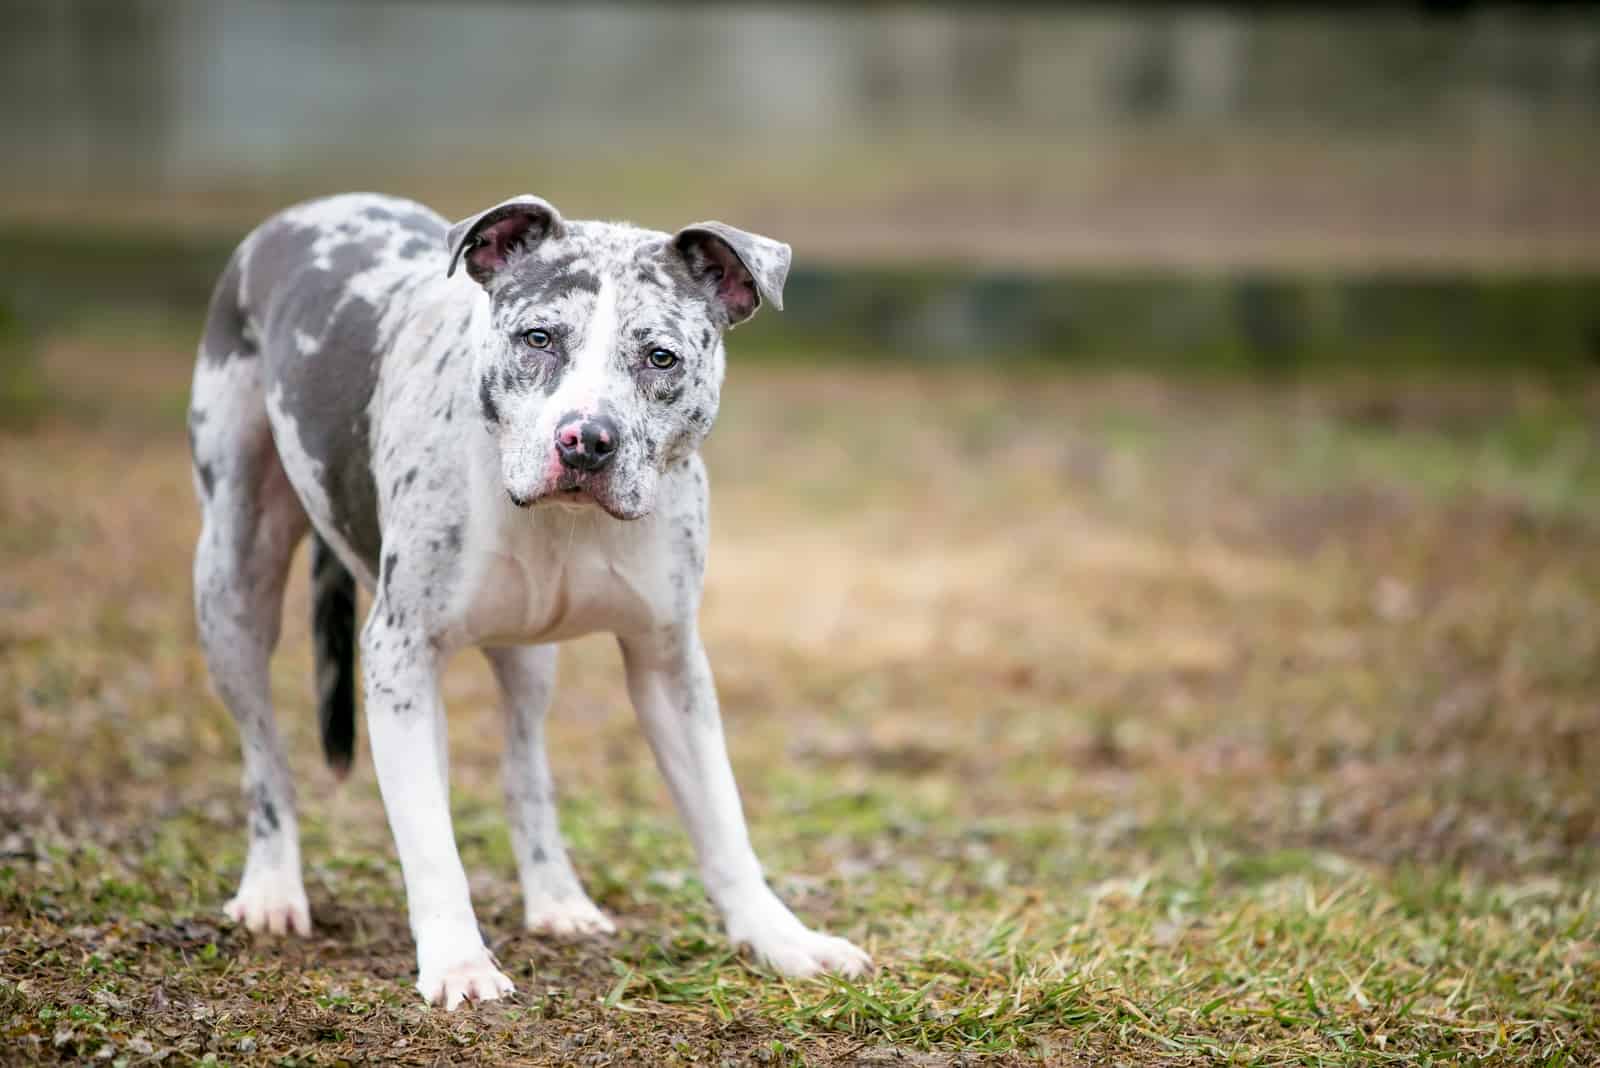 A Catahoula Leopard Dog x Pit Bull Terrier mixed breed dog displaying nervous body language and looking at the camera